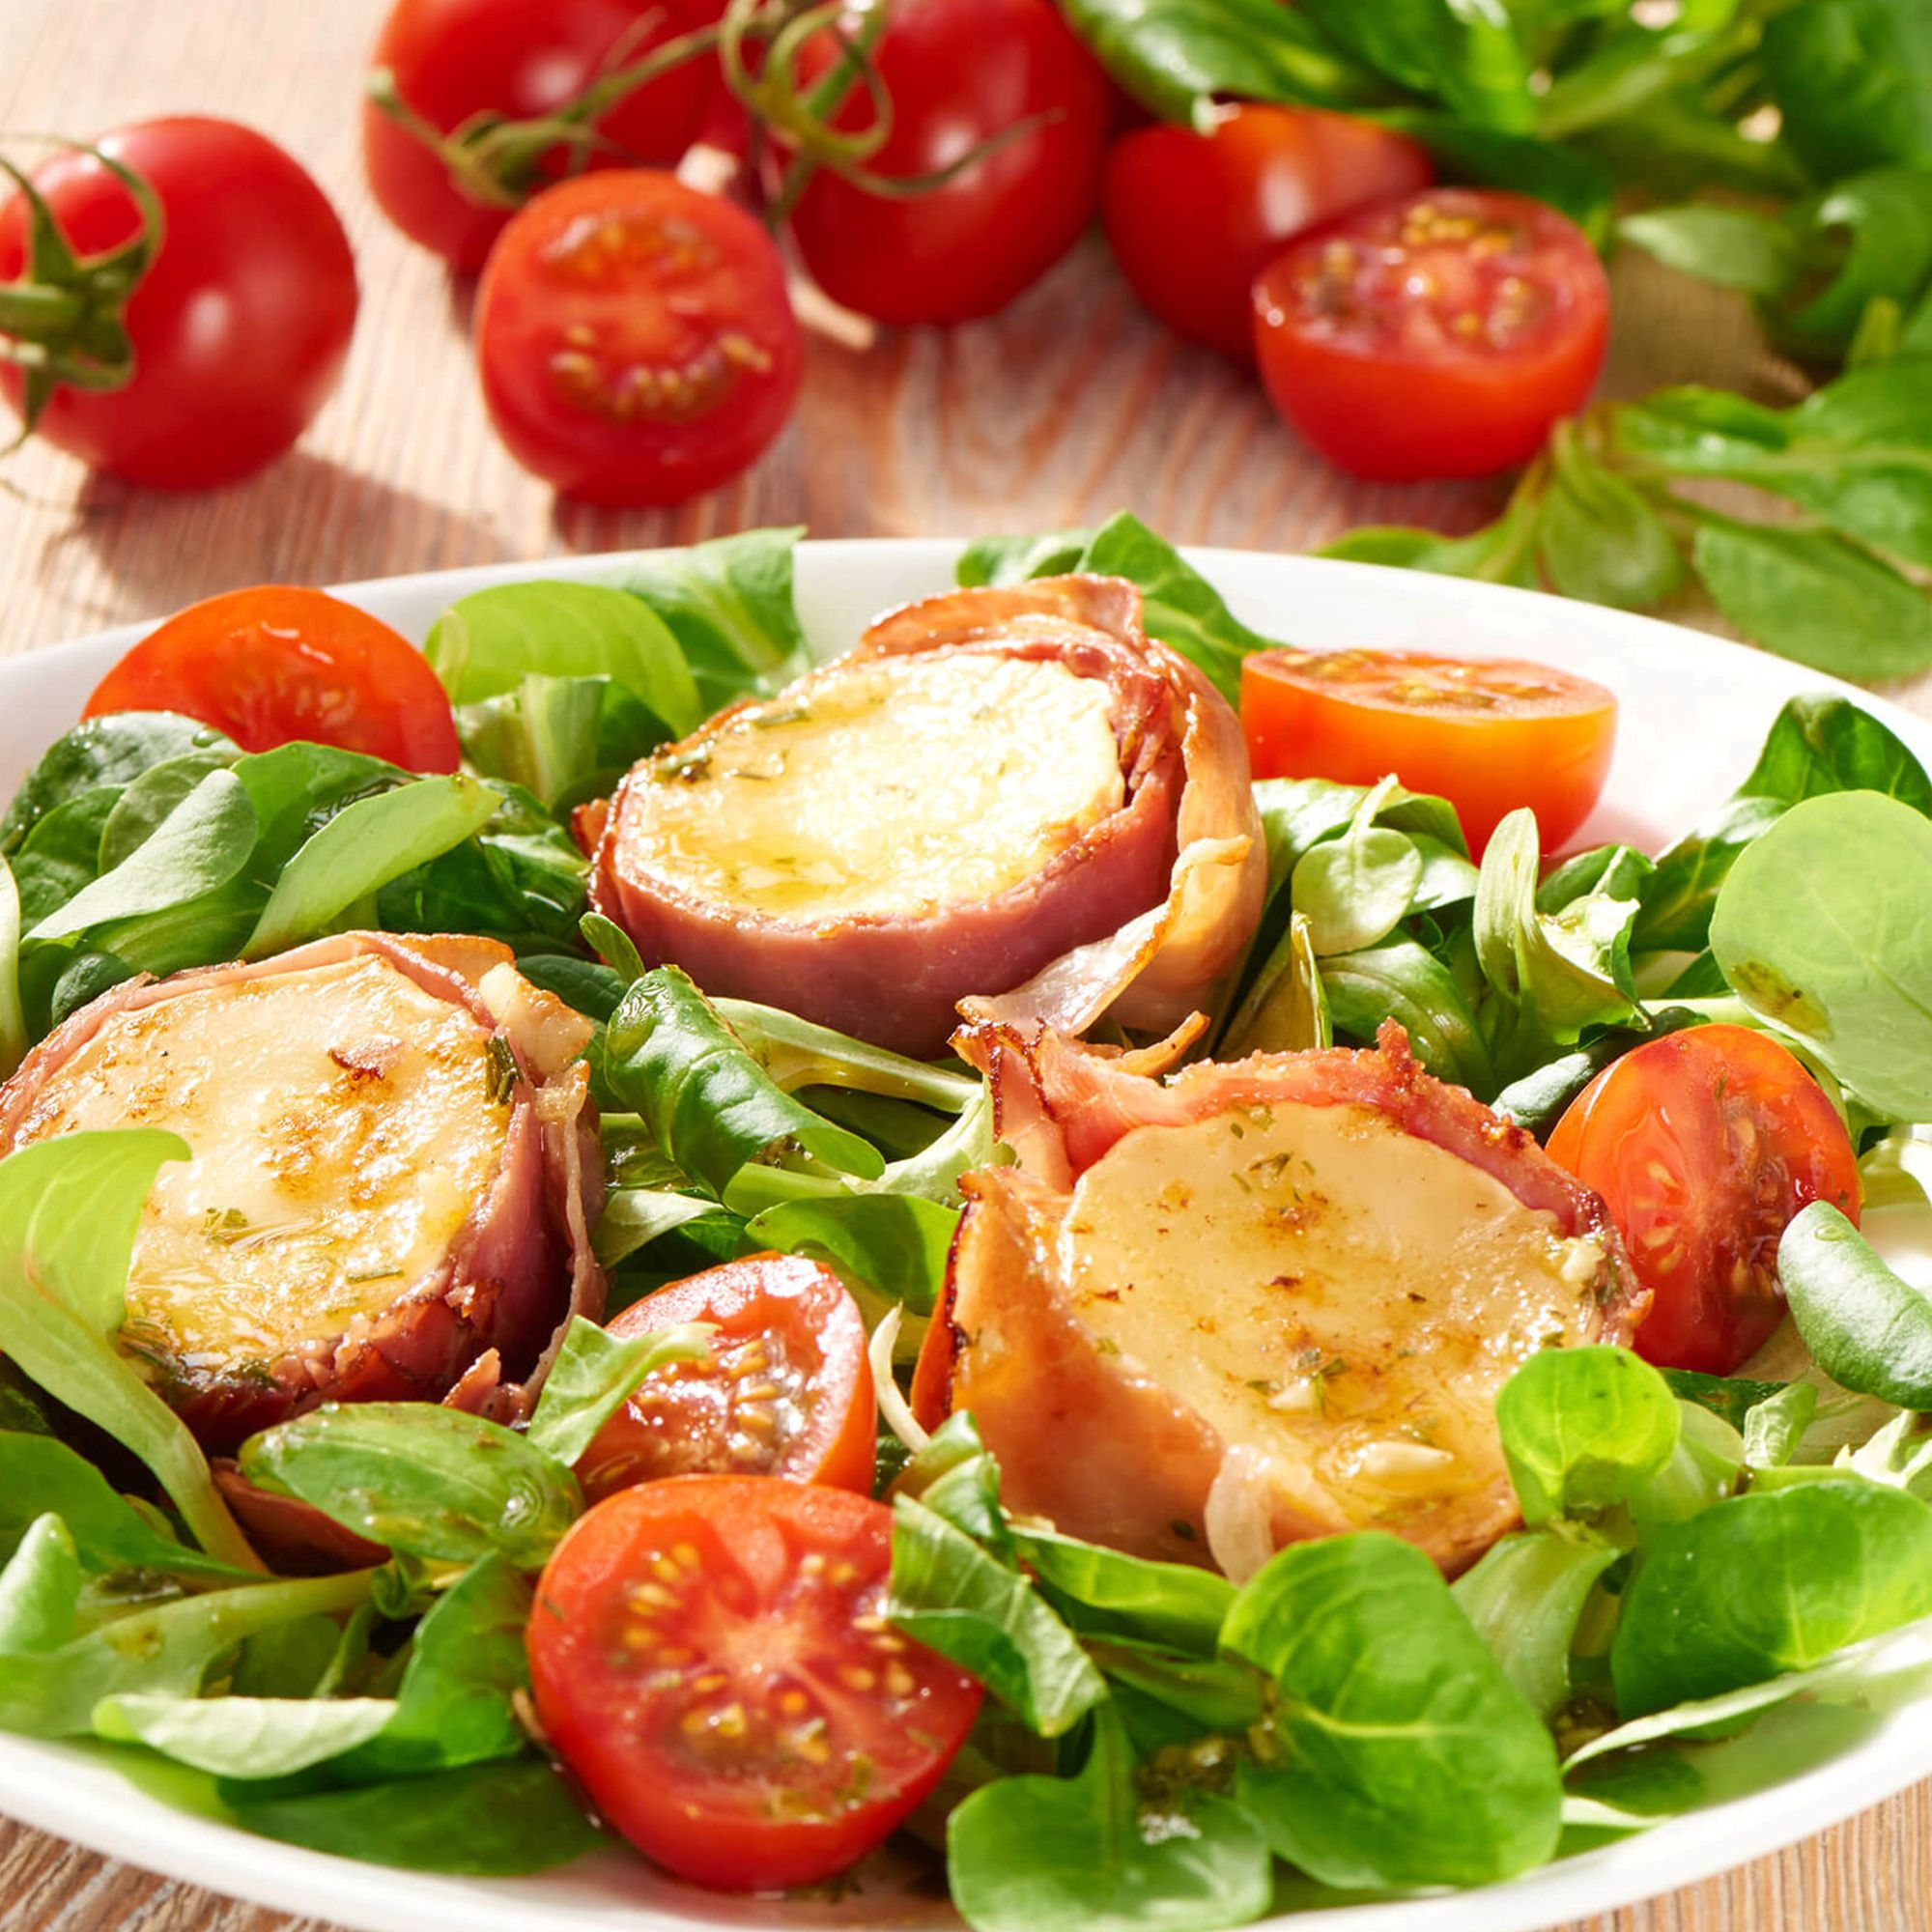 Tomato and Lettuce Salad with Mayo